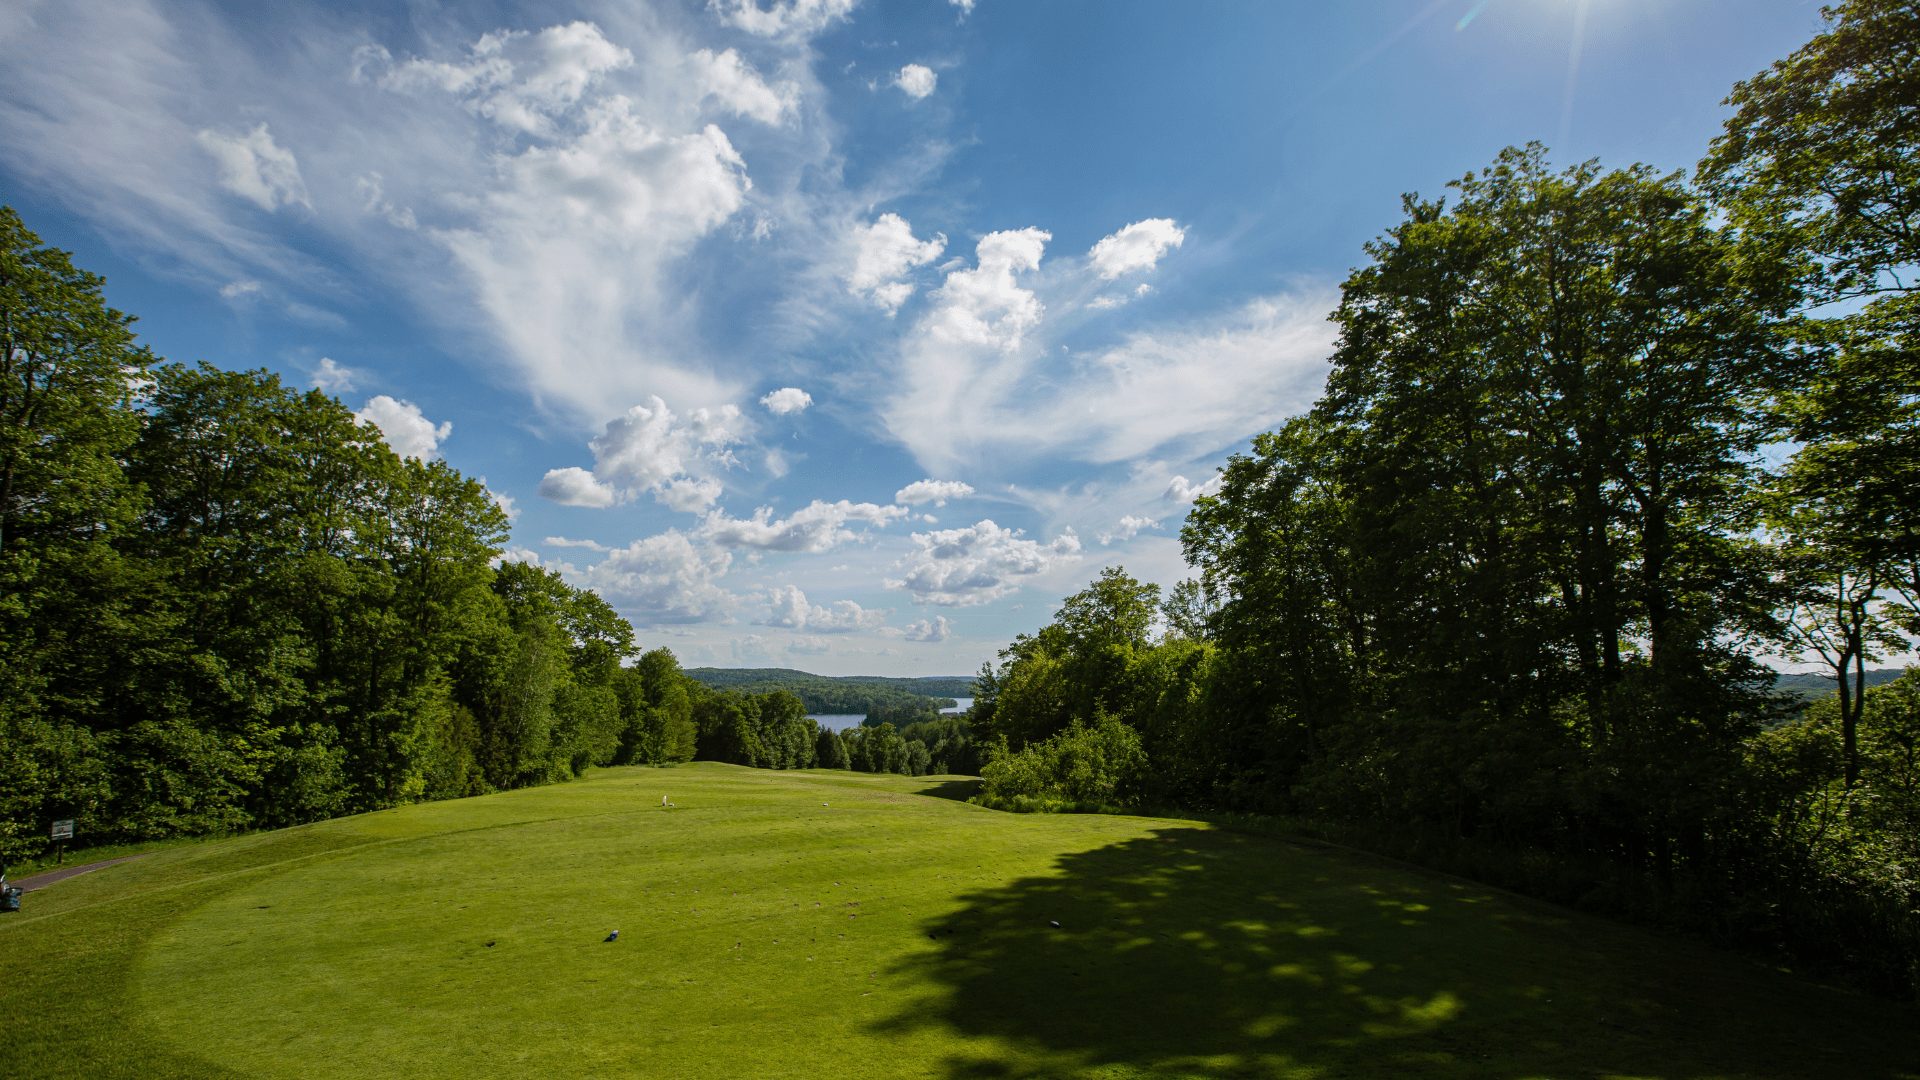 A view of trees and the lake off the tee at Deerhurst Highlands Golf Course